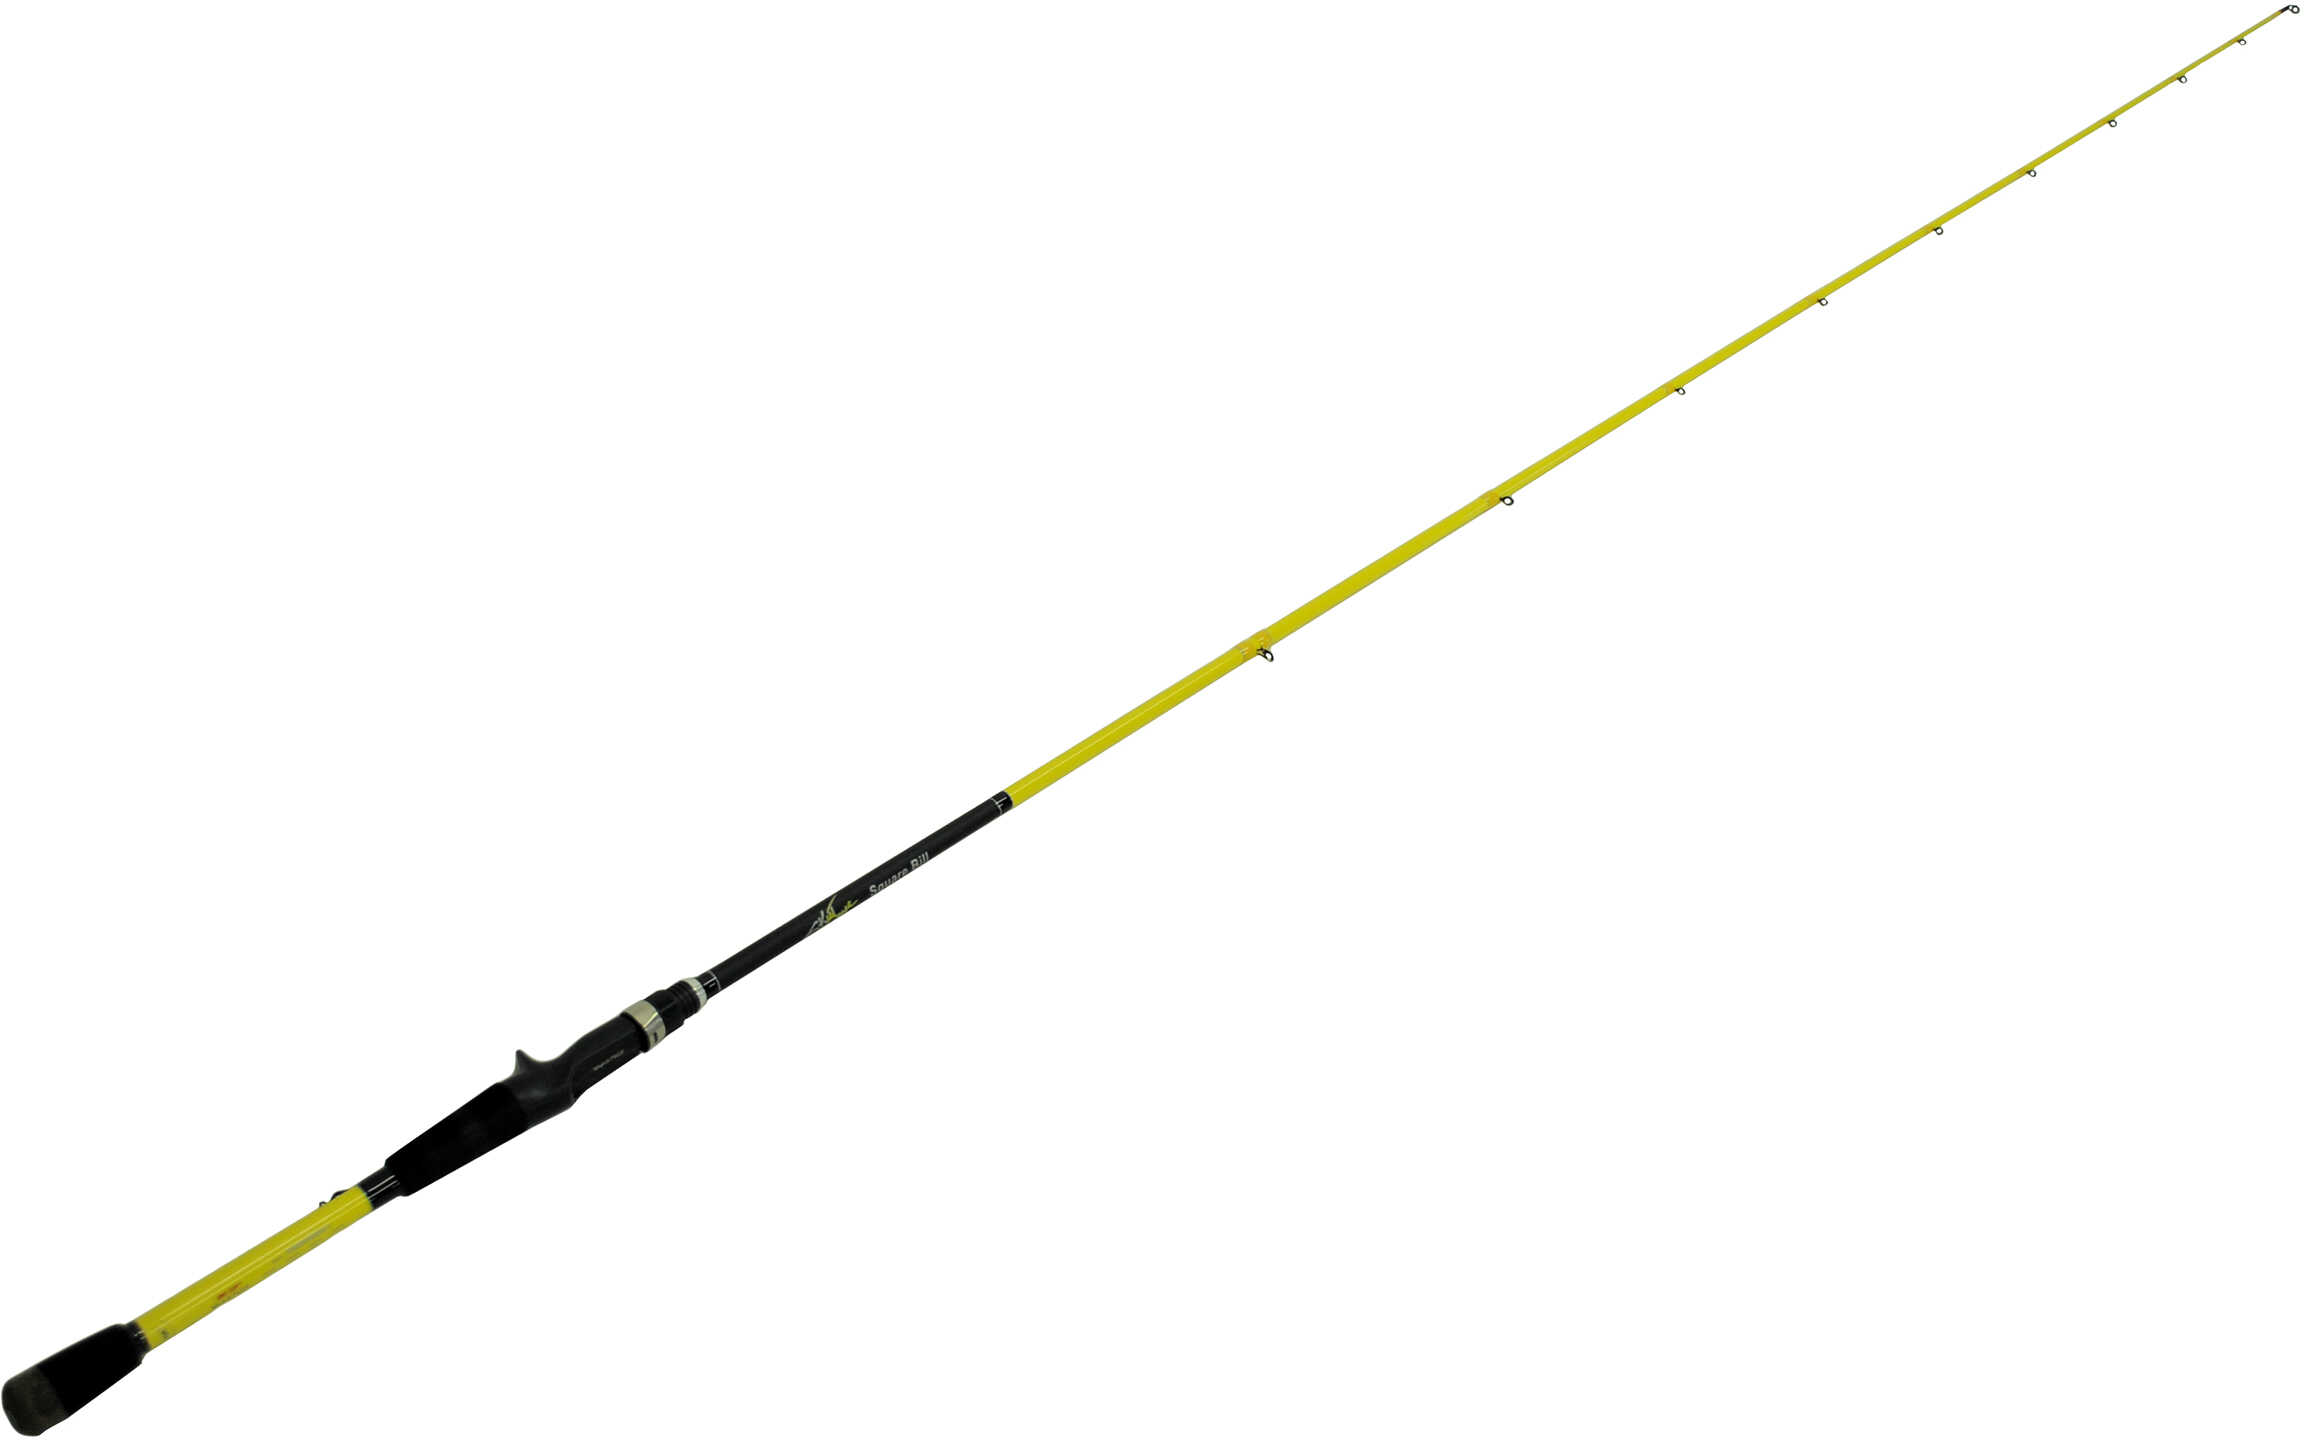 Eagle Claw Fishing Tackle Skeet Reese Square Bill Crankin 68" Casting Rod